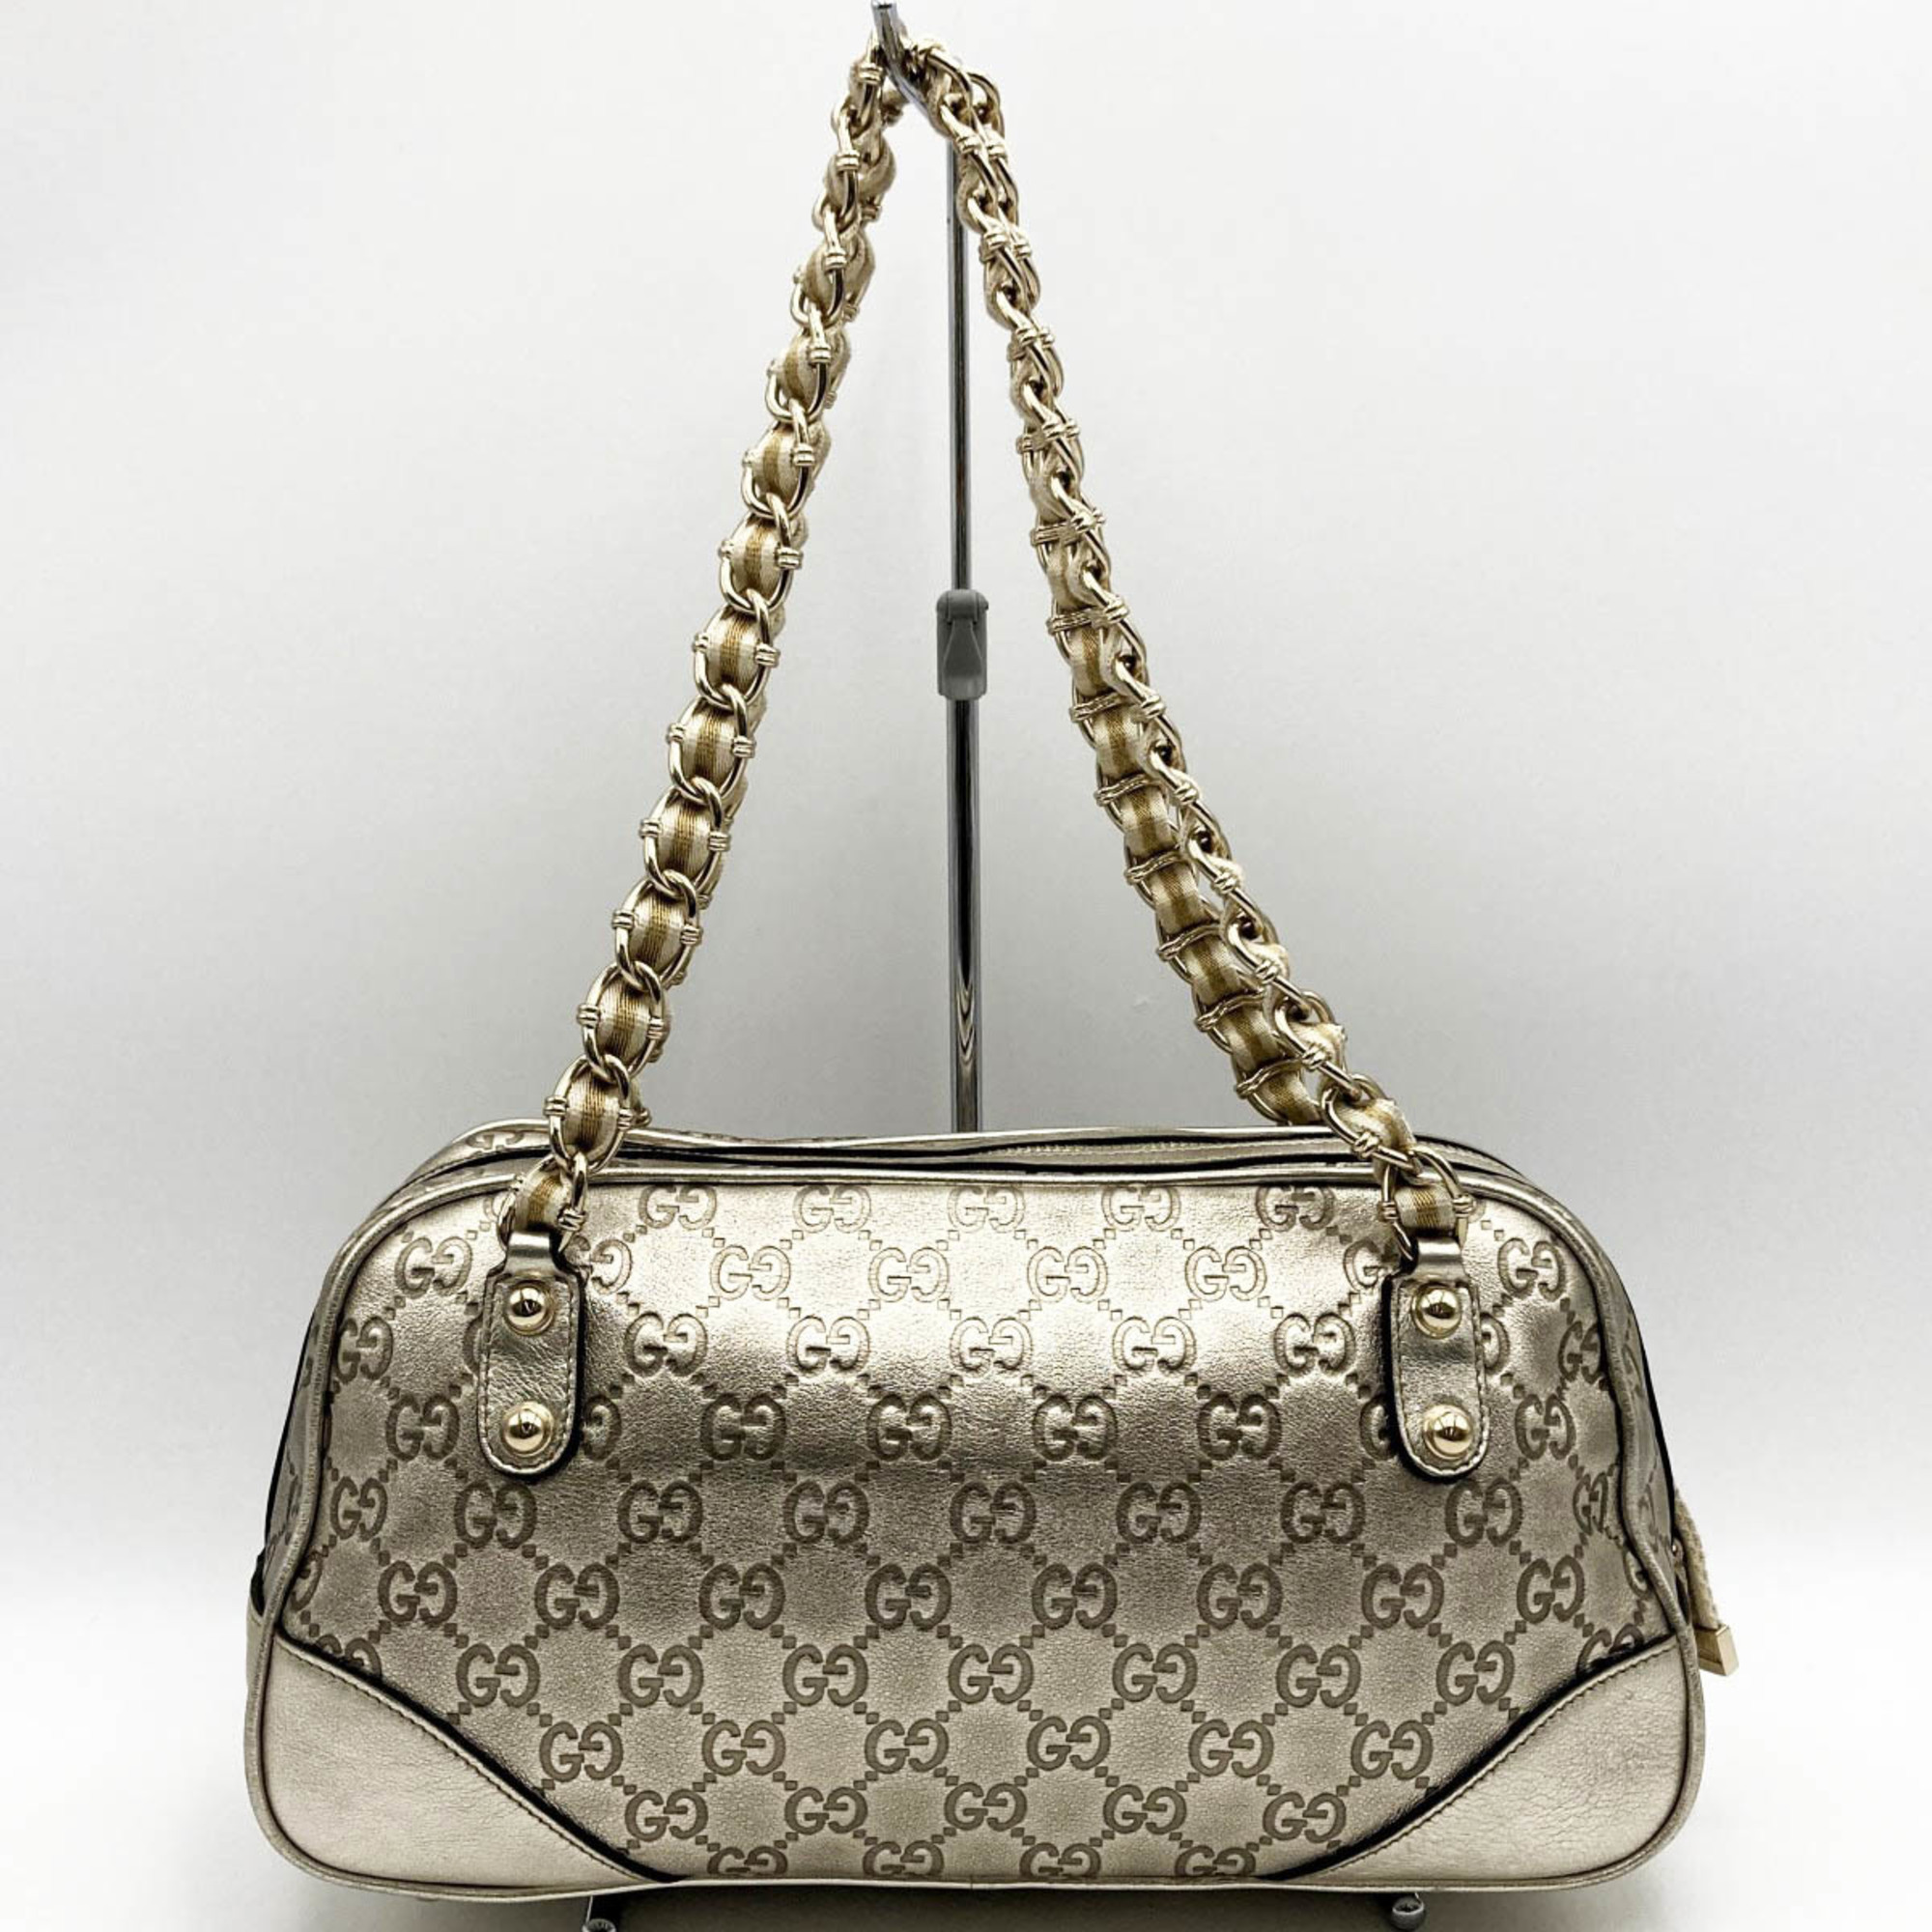 GUCCI Gucci GG pattern shoulder bag Guccisima chain gold leather ladies 152462 USED